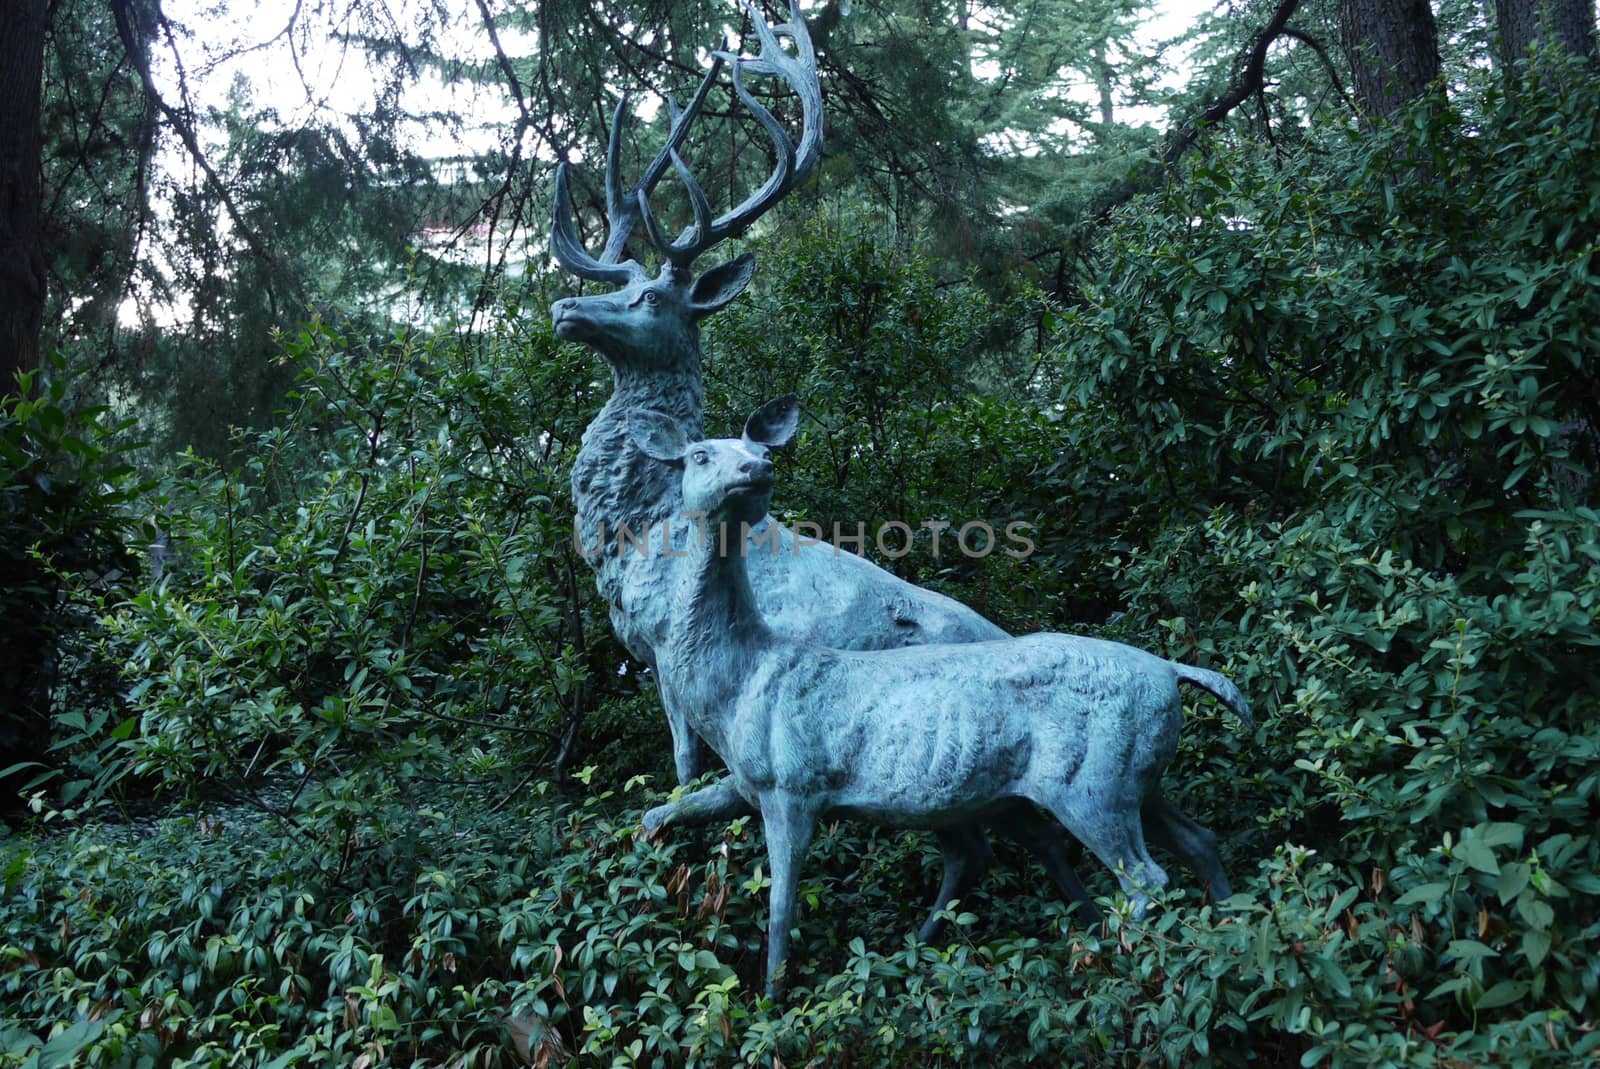 Decorative sculpture depicting two forest animals against a background of green bushes and trees